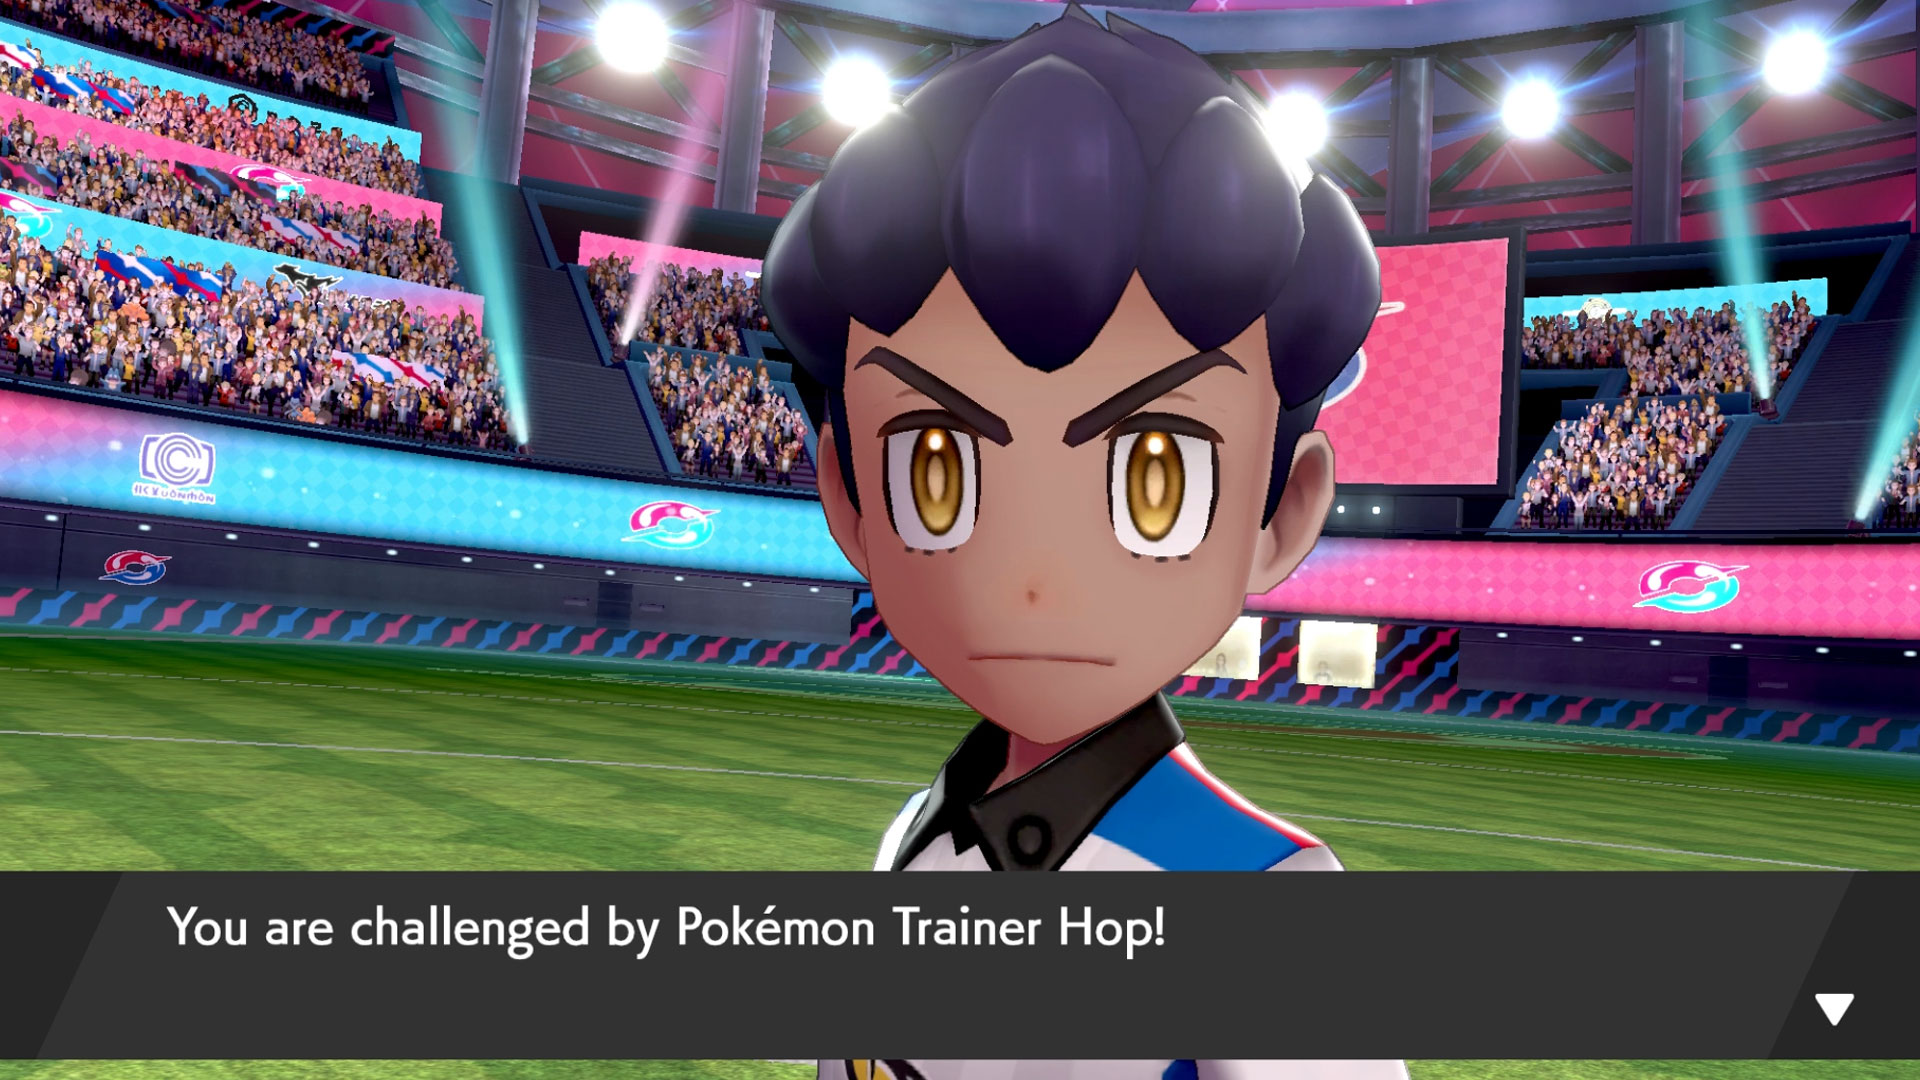 Pokemon Sword and Shield complete guide and walkthrough